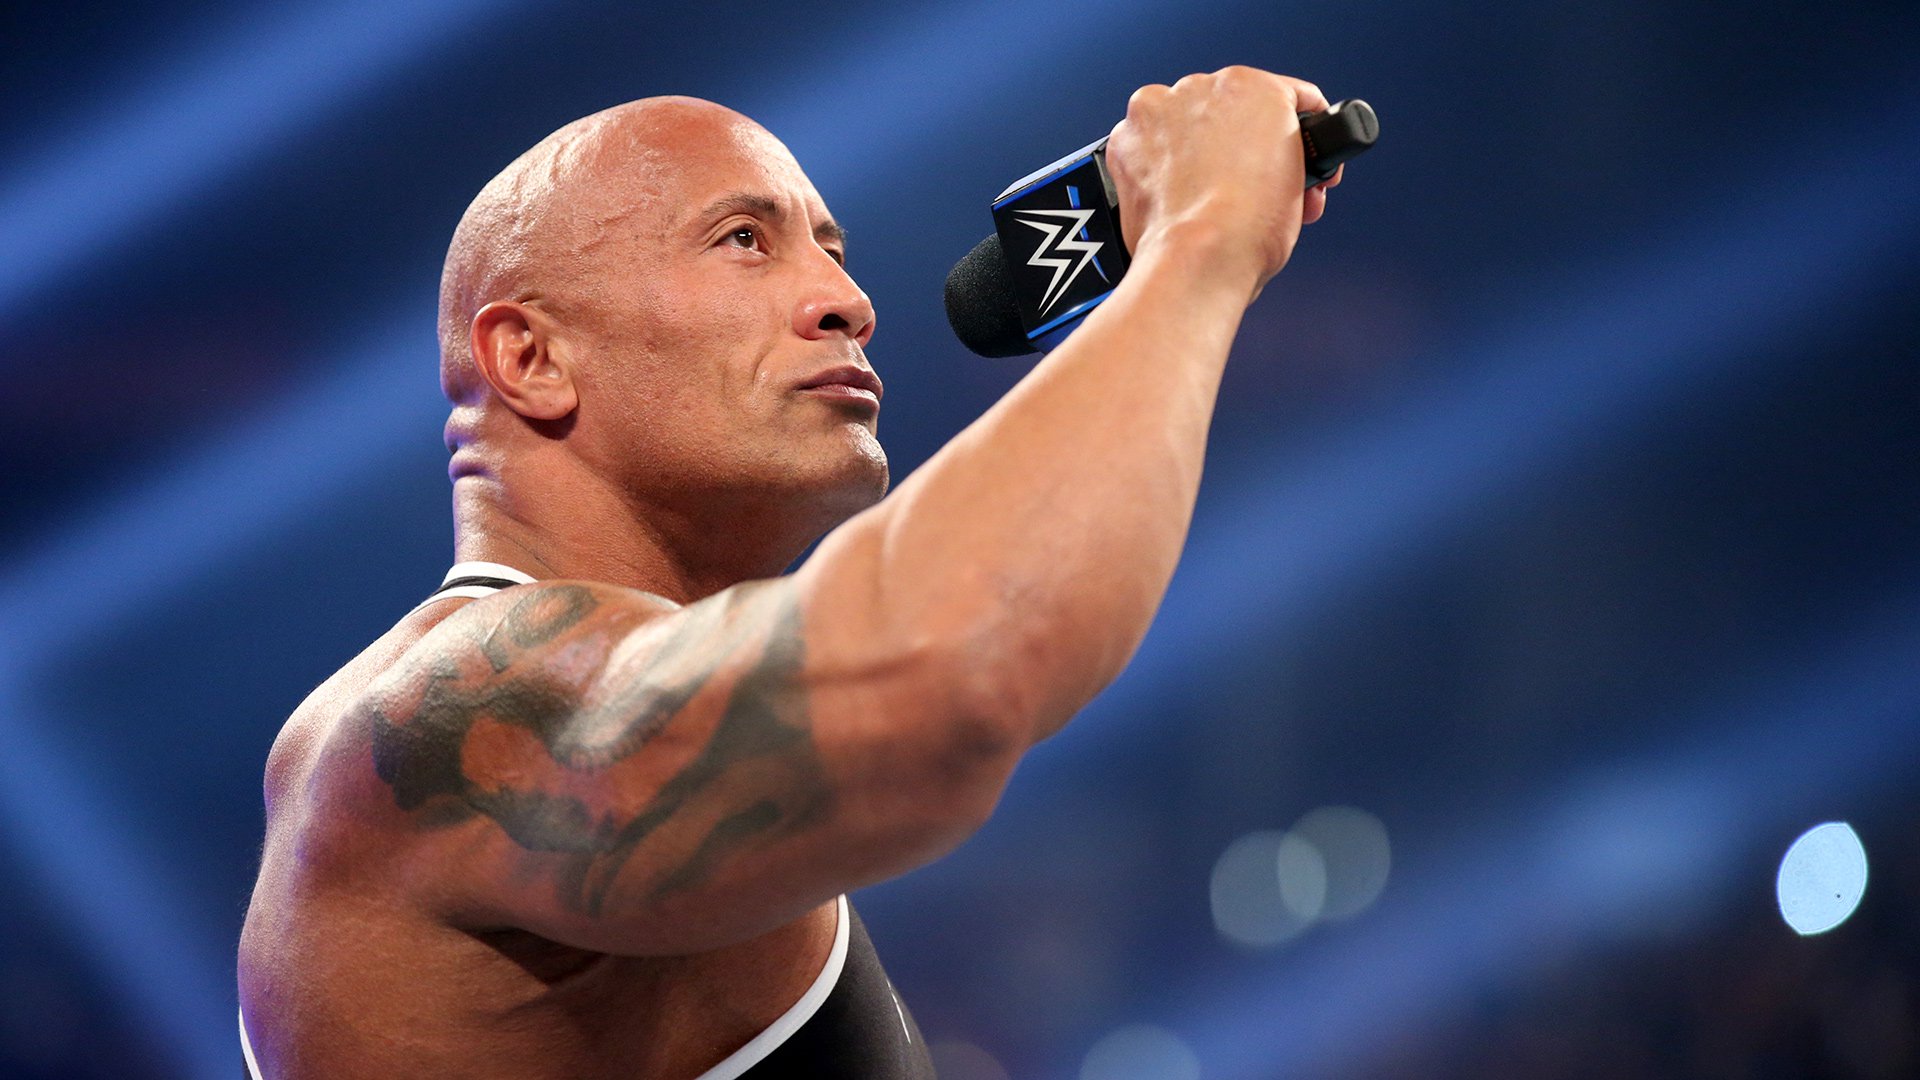 The Rock Confirms Match vs. Roman Reigns Was Locked For WWE